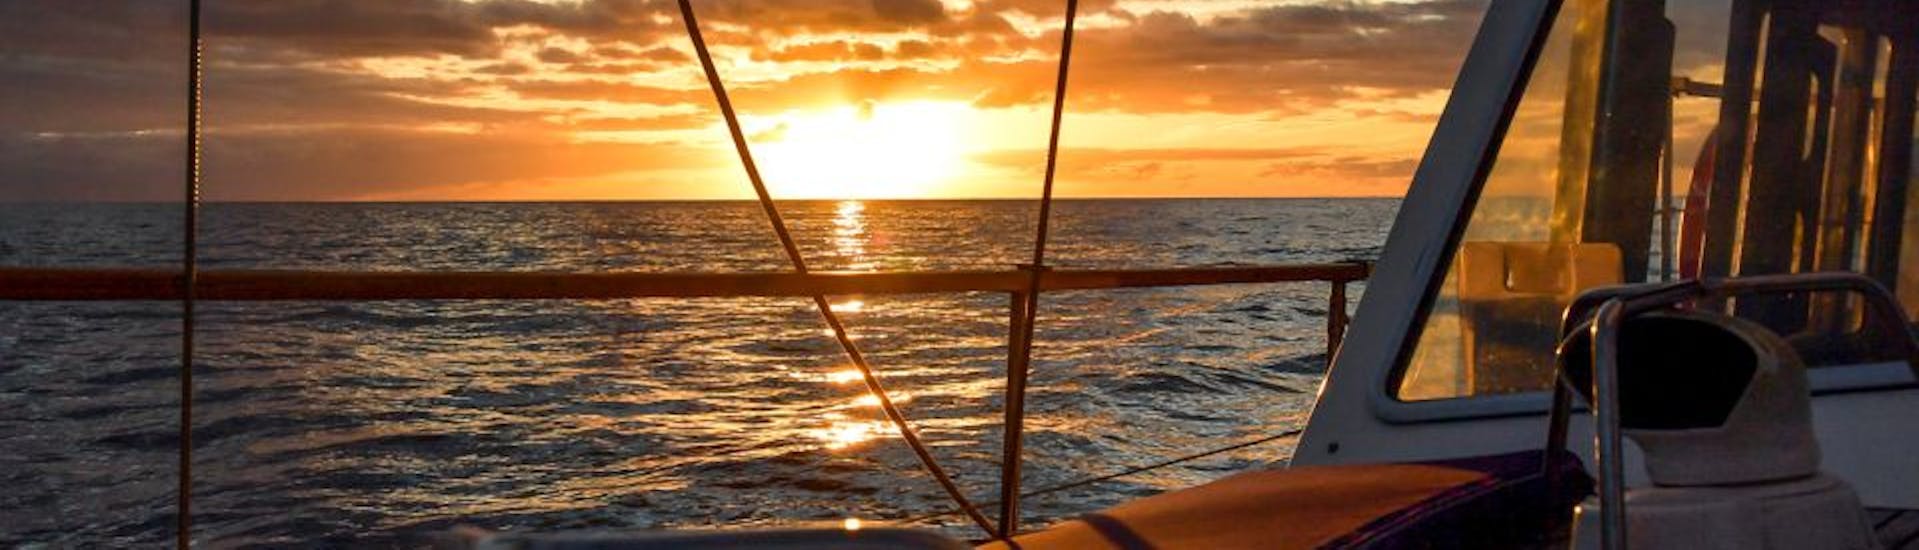 Sunset Sail Tour to the Bay of Camar de Labos with Dolphin watching.